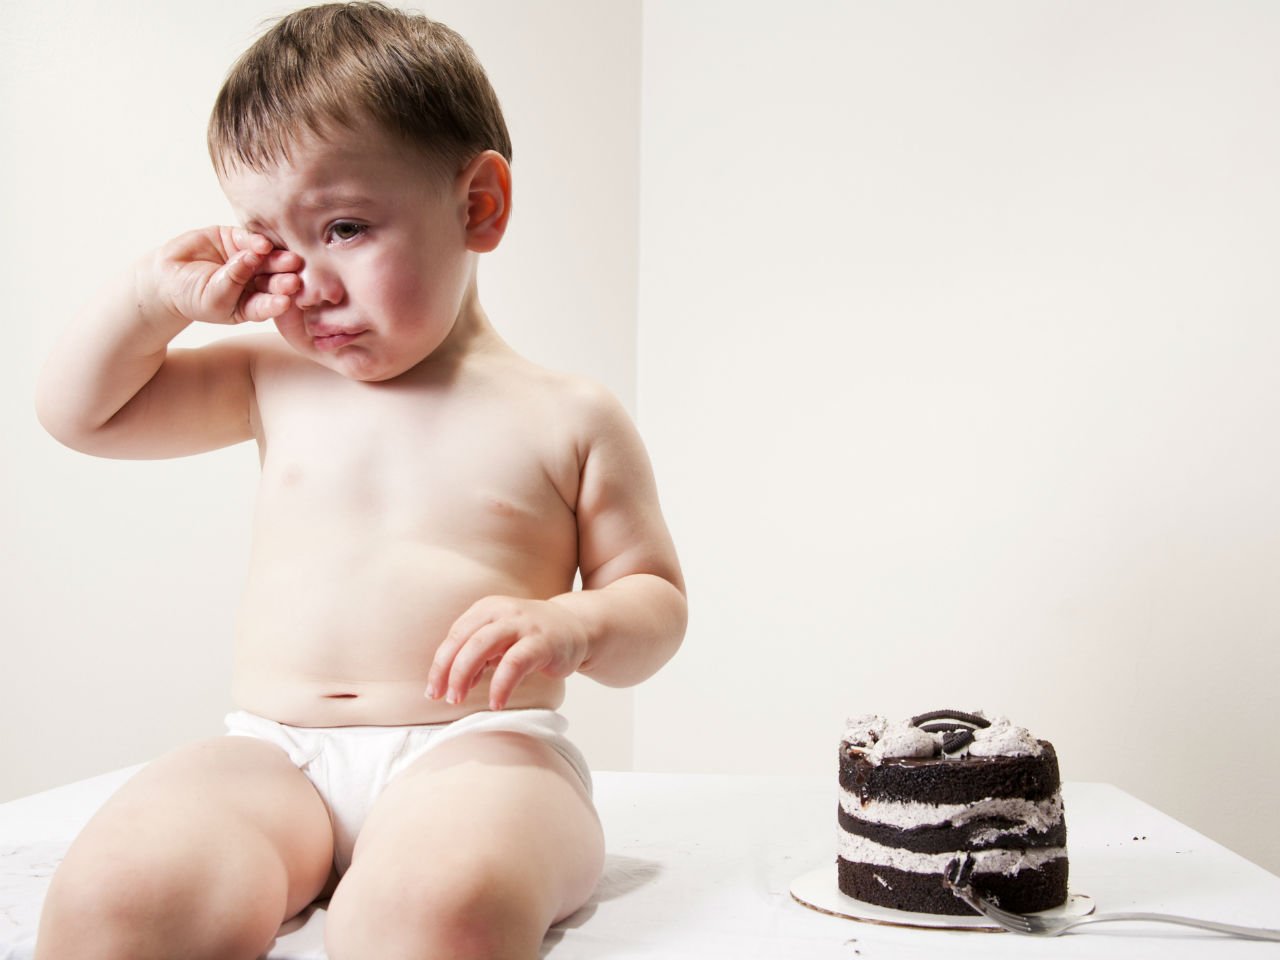 Baby crying next to a cake